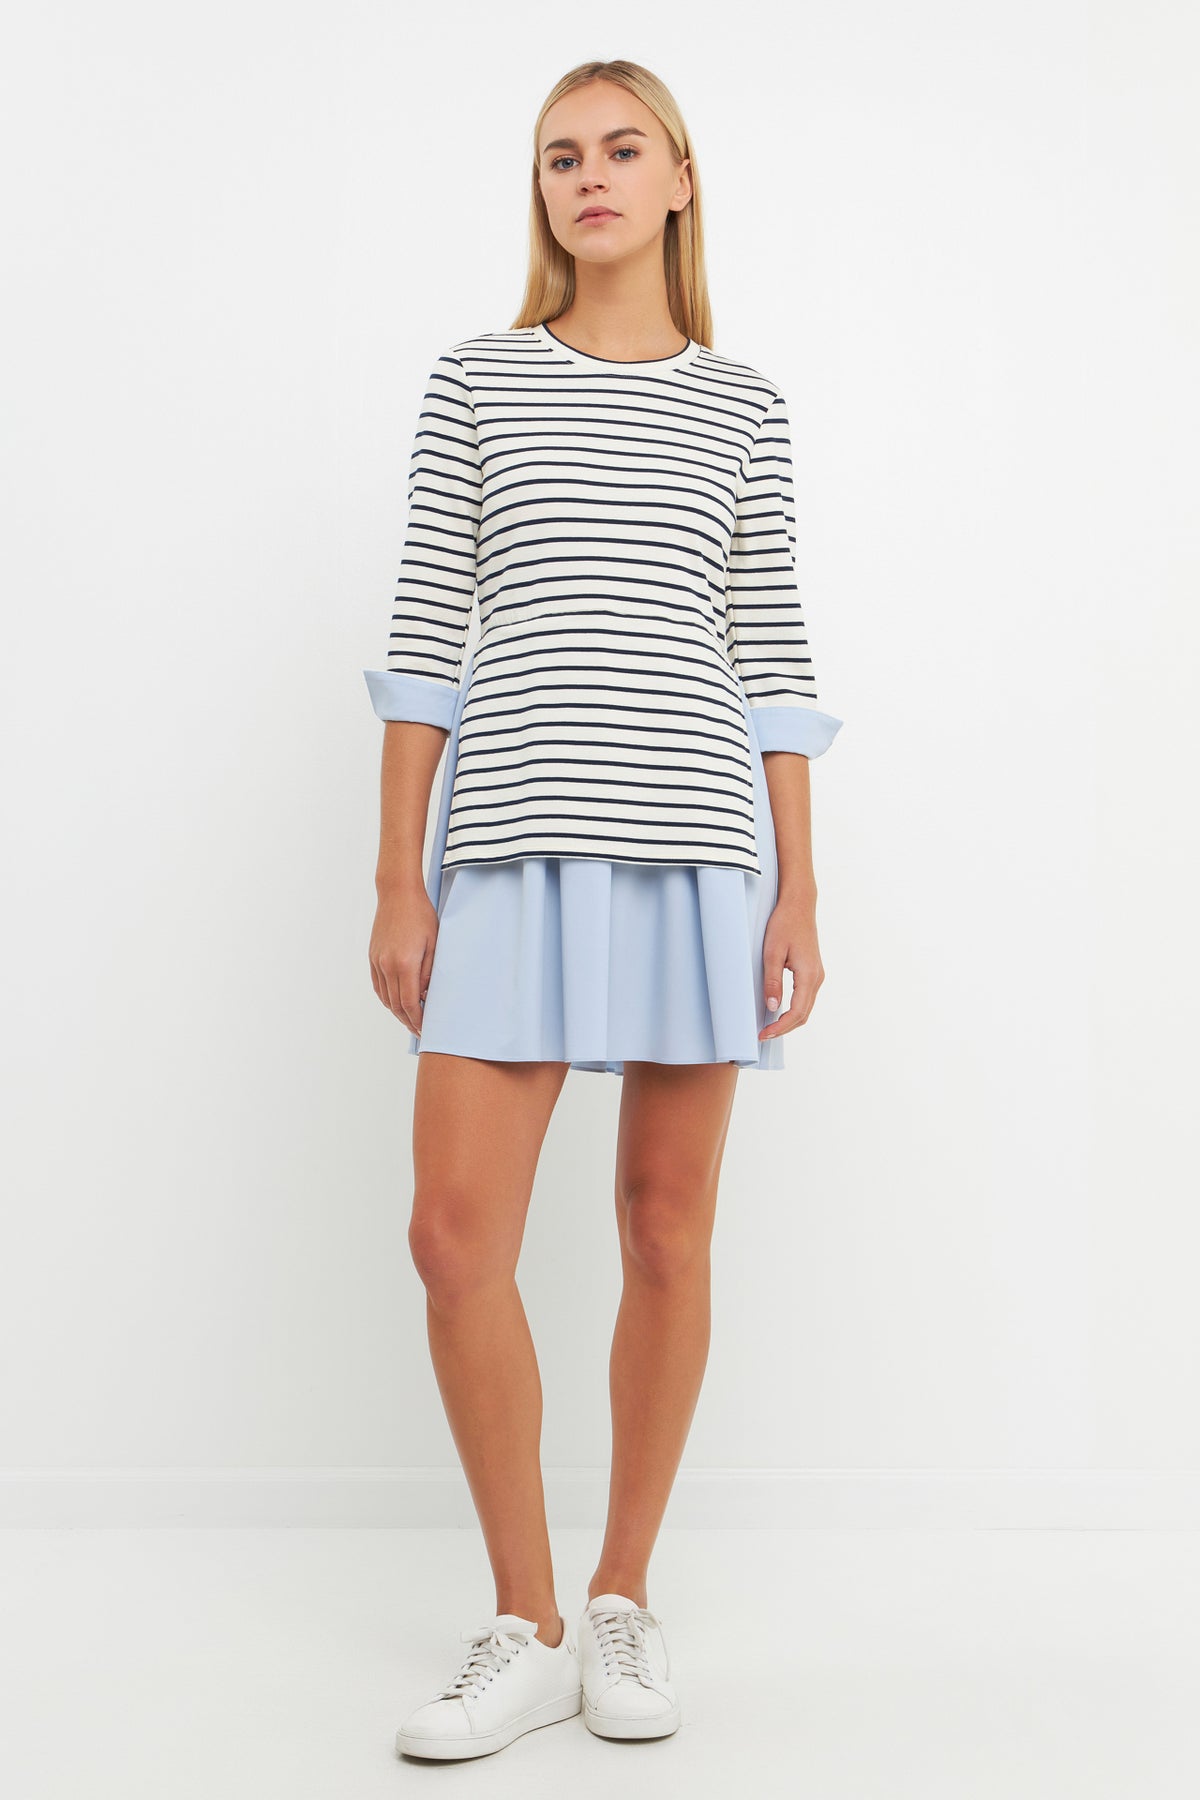 ENGLISH FACTORY - Striped Knit and Oxford Combo Dress - DRESSES available at Objectrare